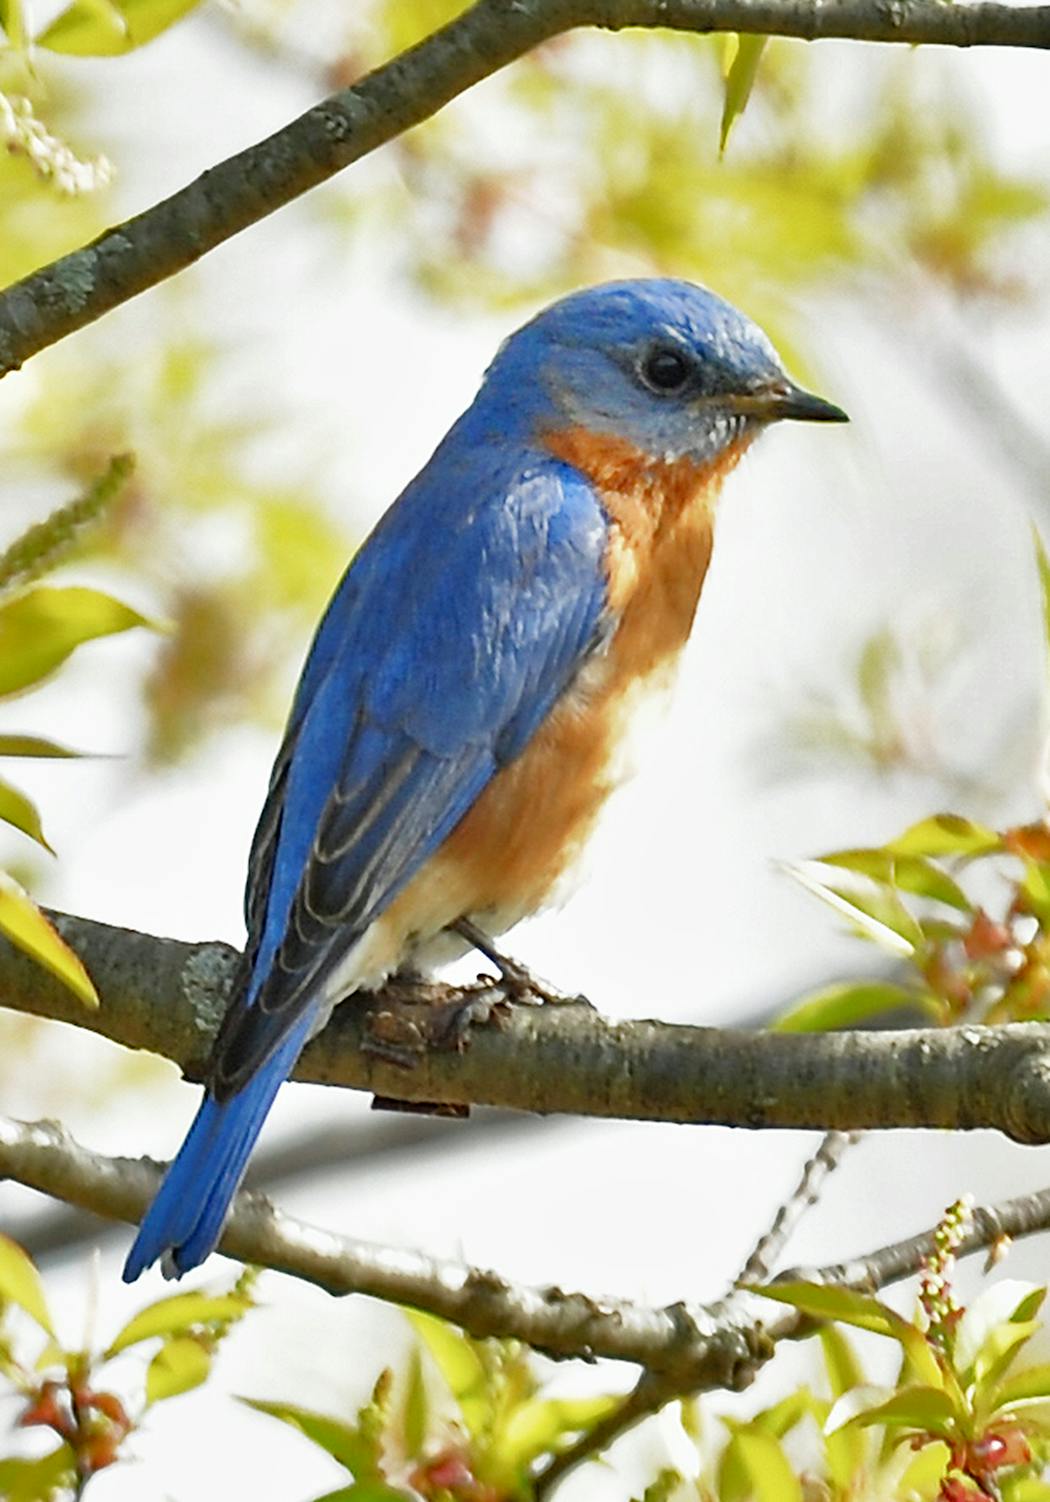 A bluebird’s intense blue is even more so to females, who can see his ultraviolet colors.